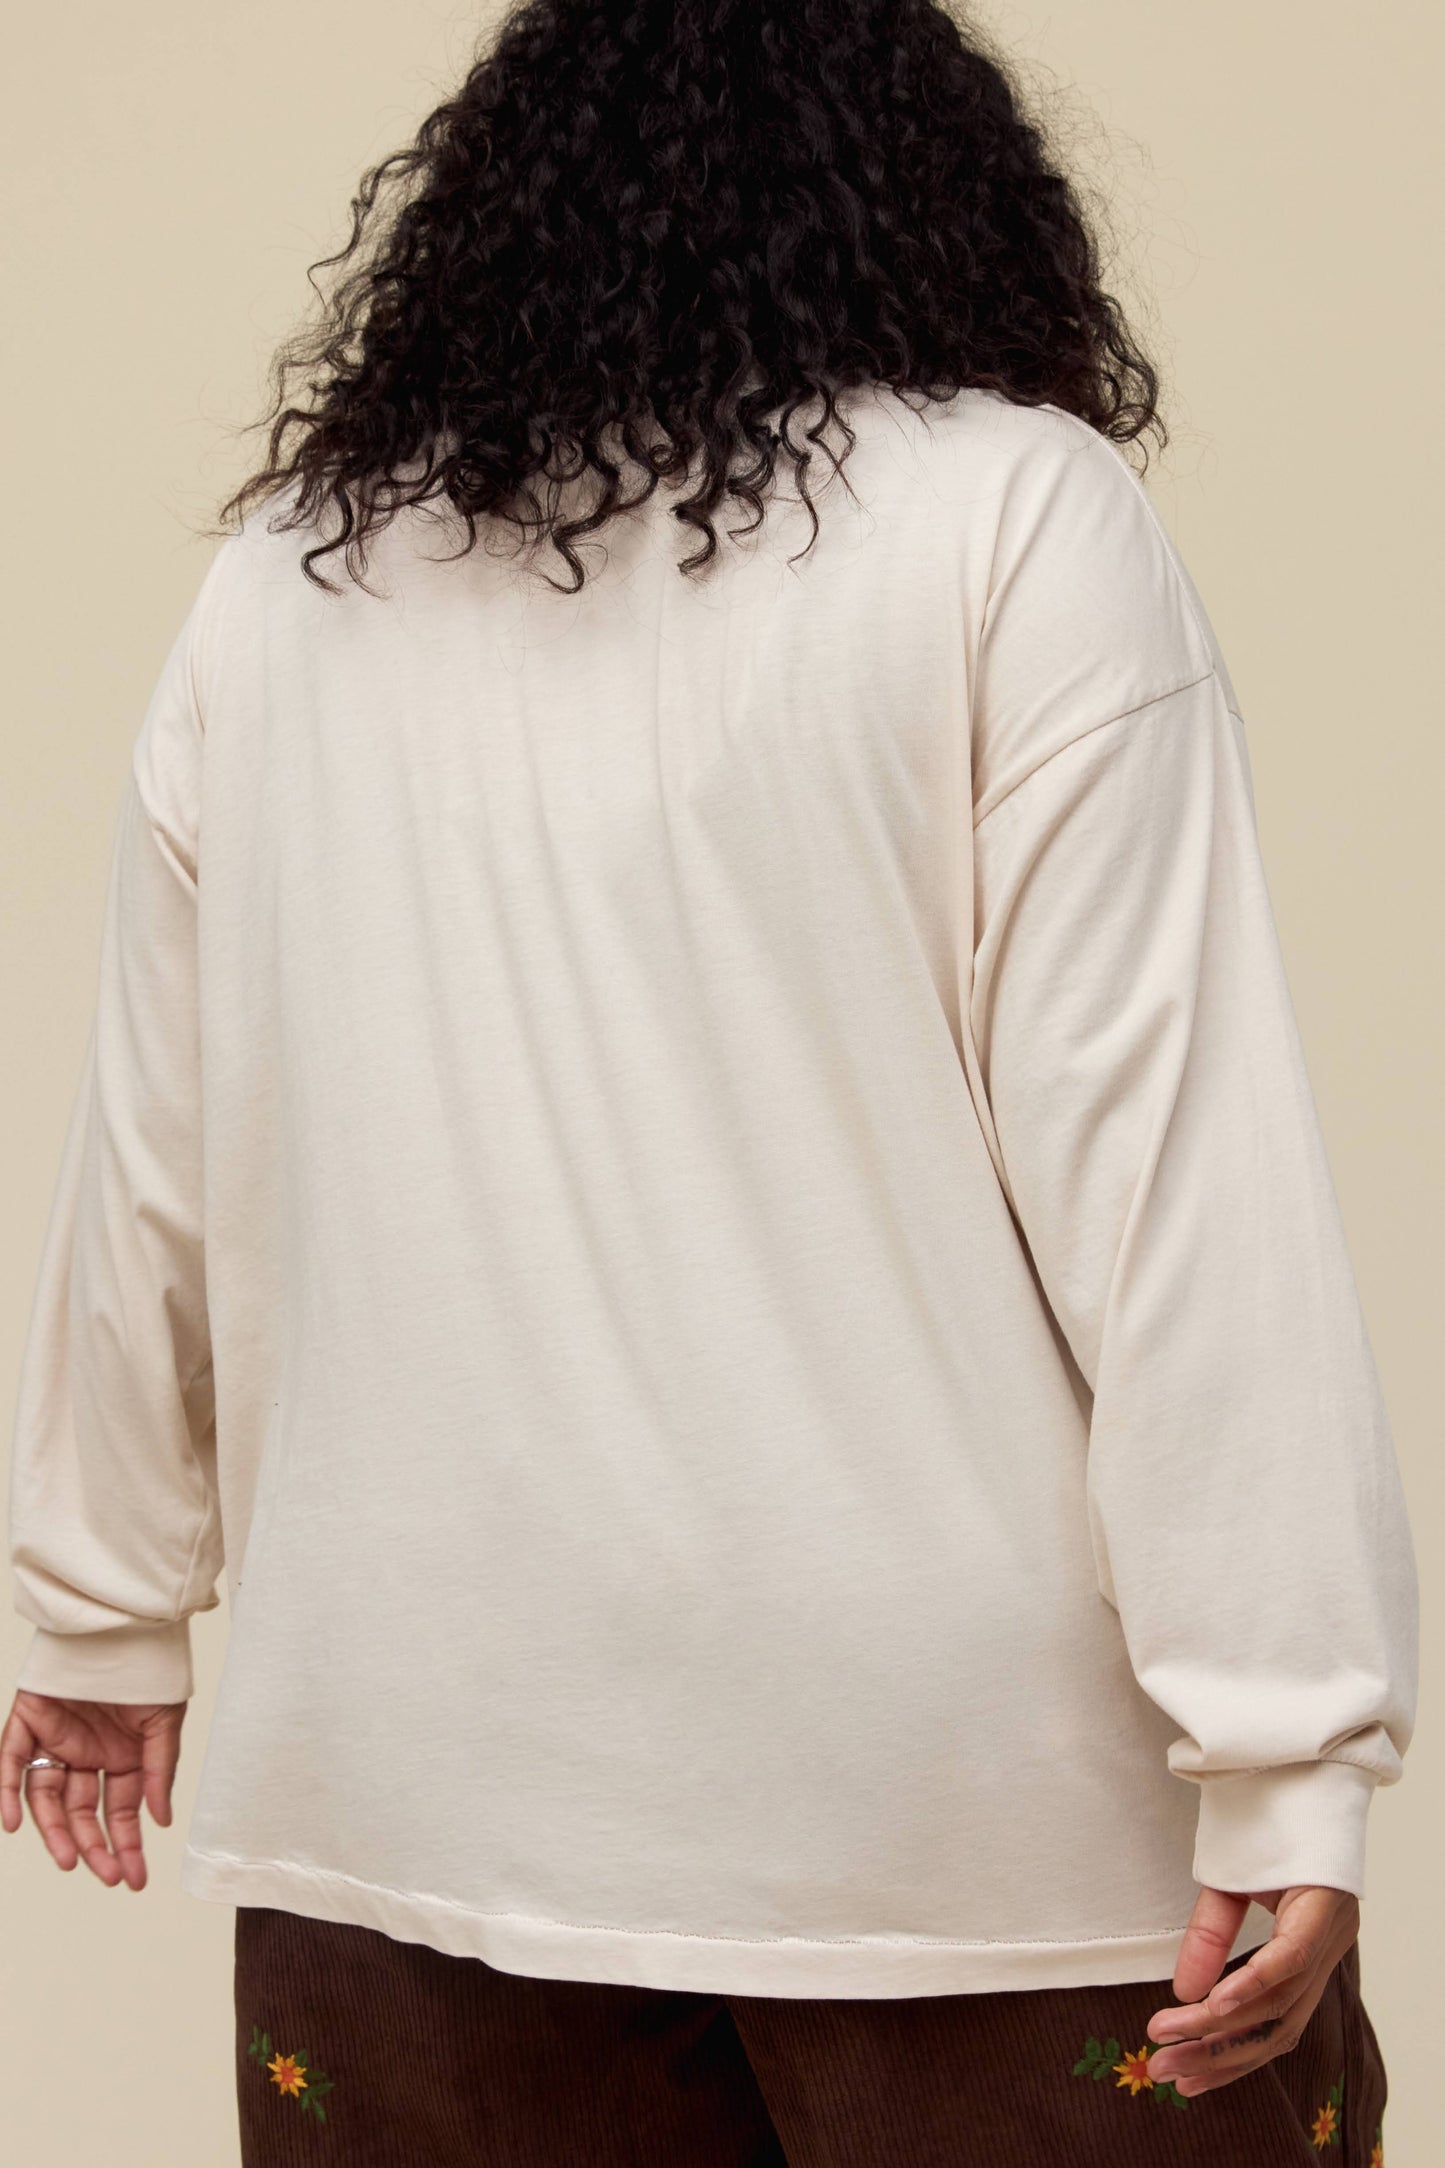 A model featuring a dirty white long sleeve designed with a king card and a portrait of Elvis stamped with his name.